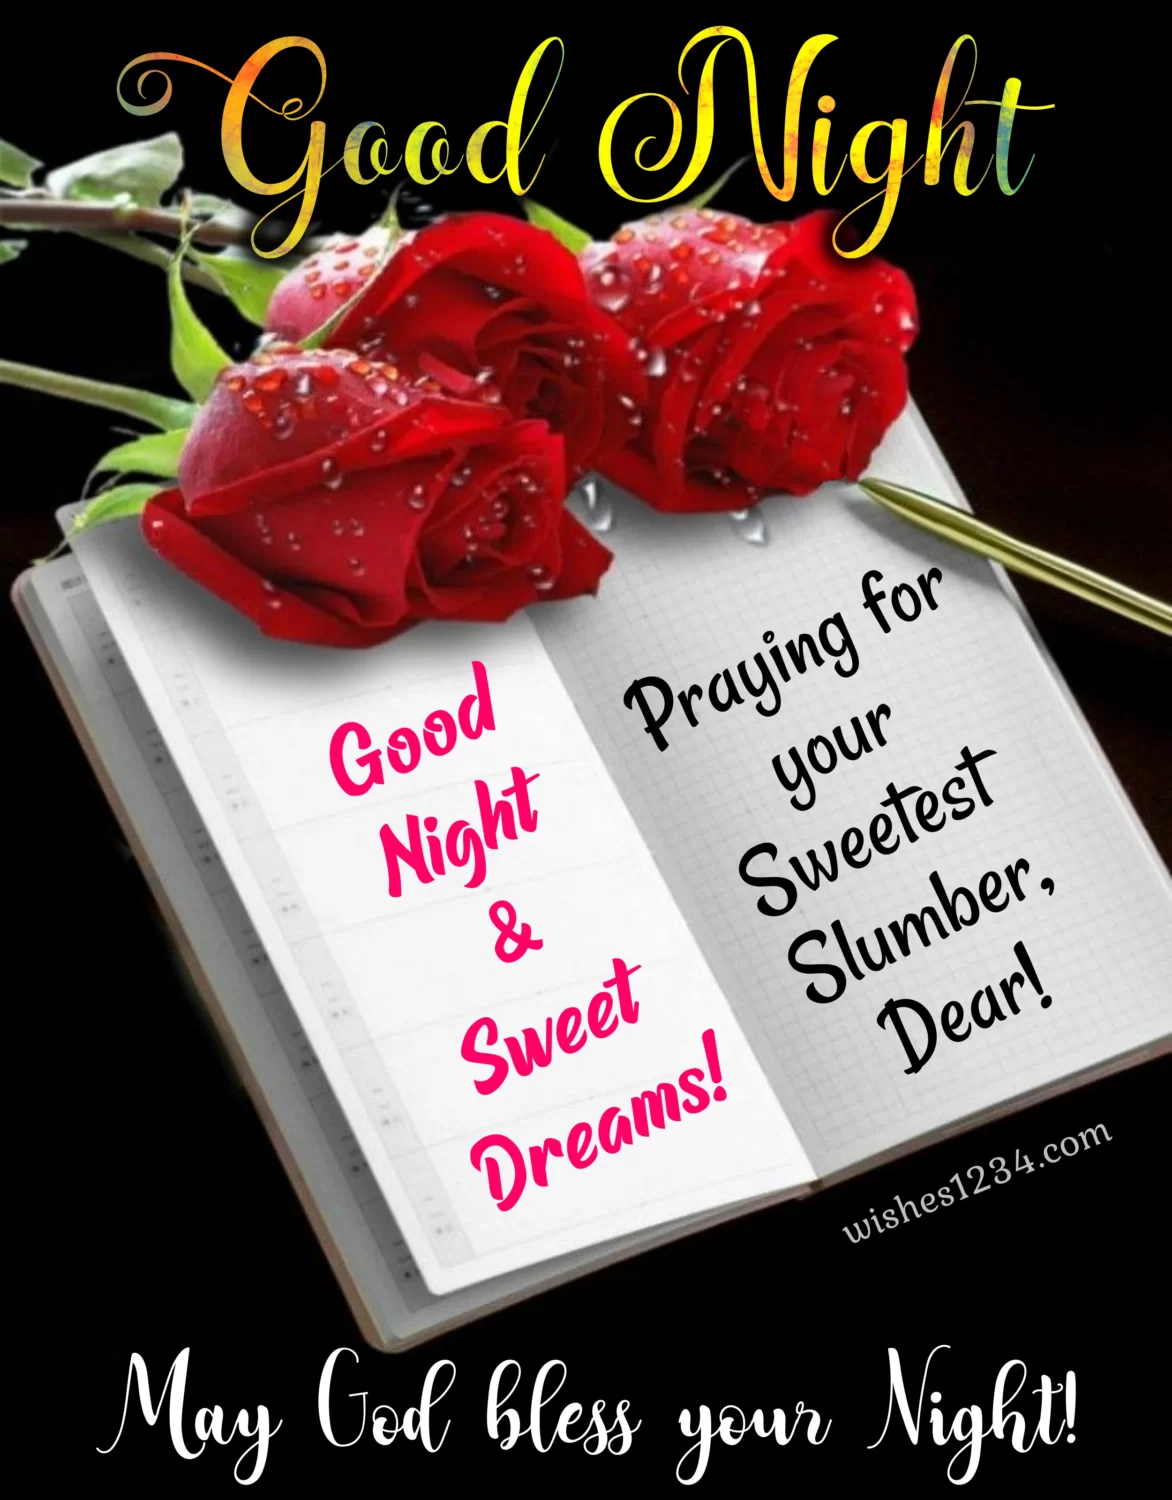 Good night blessing on note book with red rose, Good Night Images.